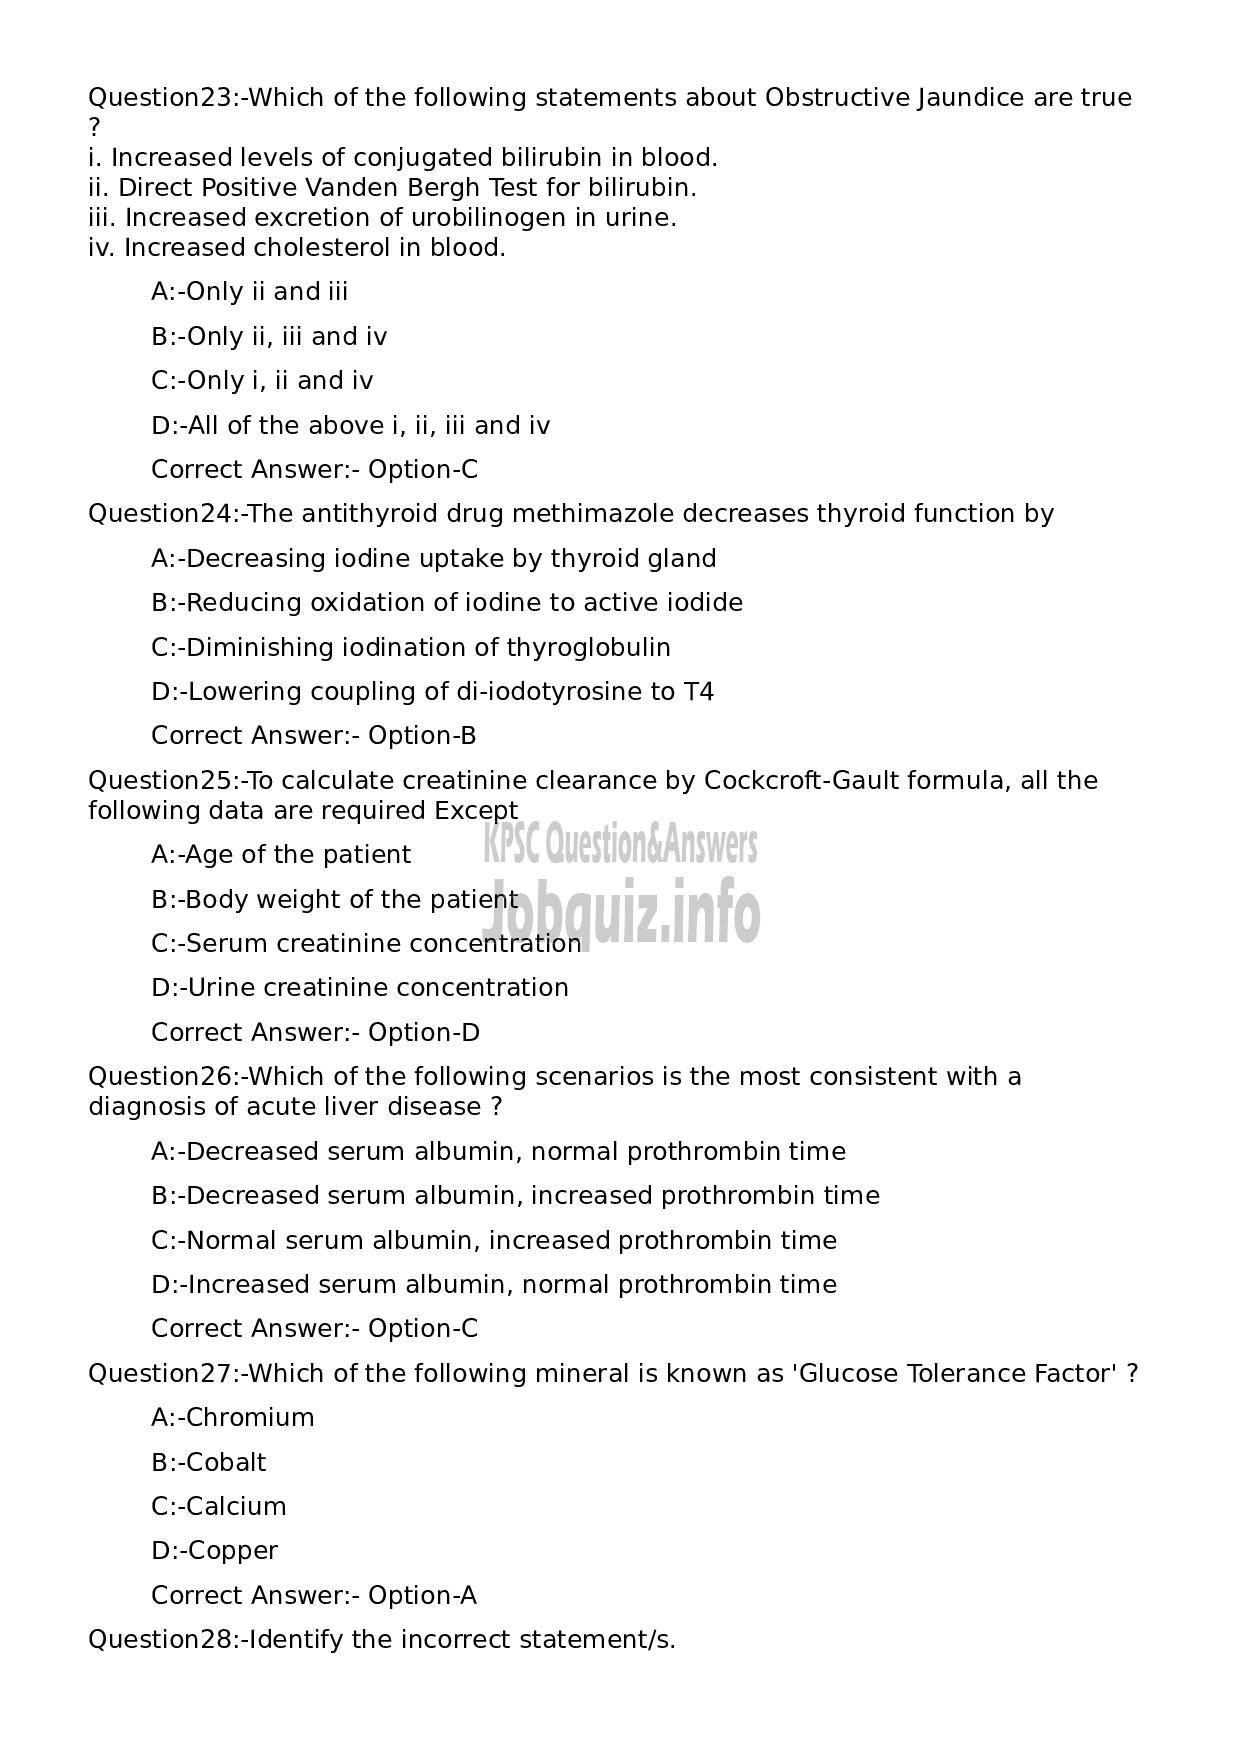 Kerala PSC Question Paper -  Assistant Professor Physiology and Biochemistry-5